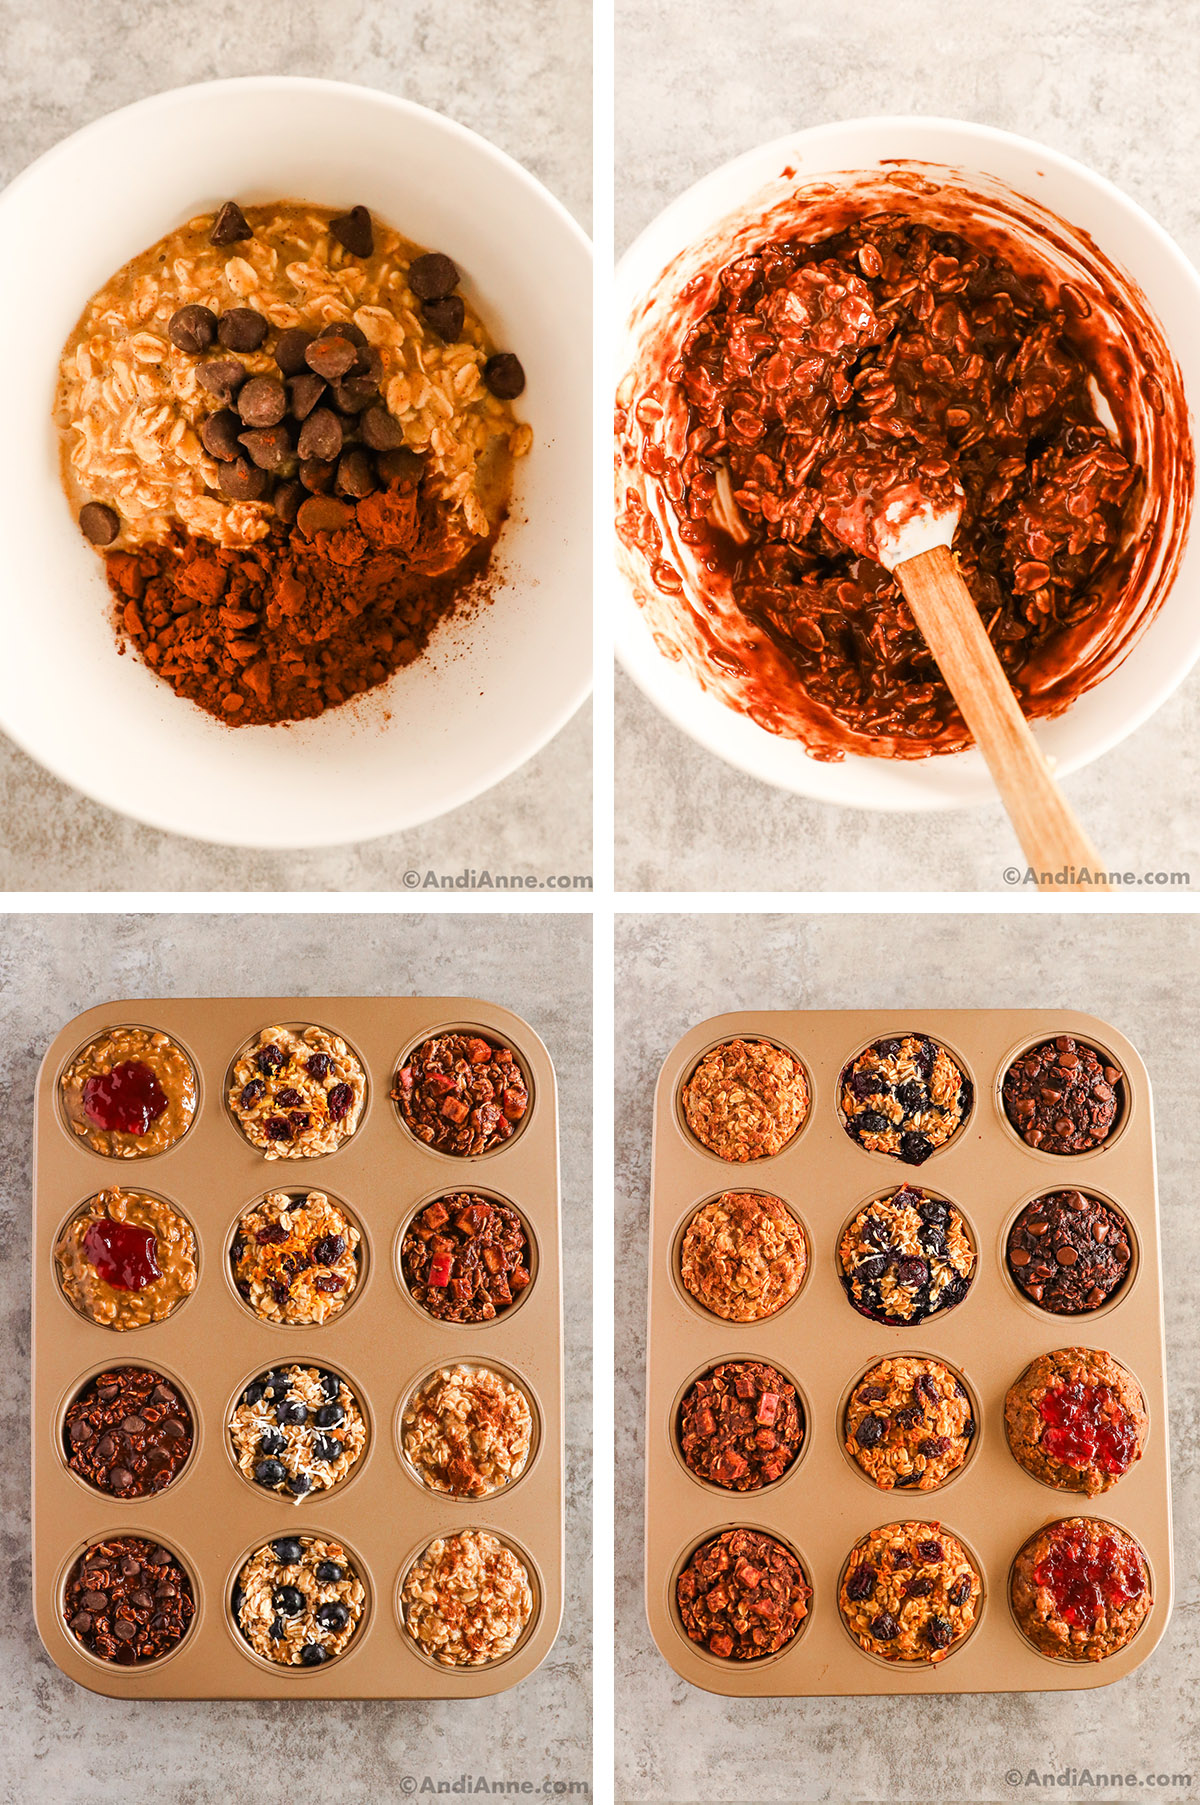 Four images together, first two are bowls with chocolate unmixed with oats, then mixed together. Second two are various muffin flavors in a muffin pan first unbaked, then baked.